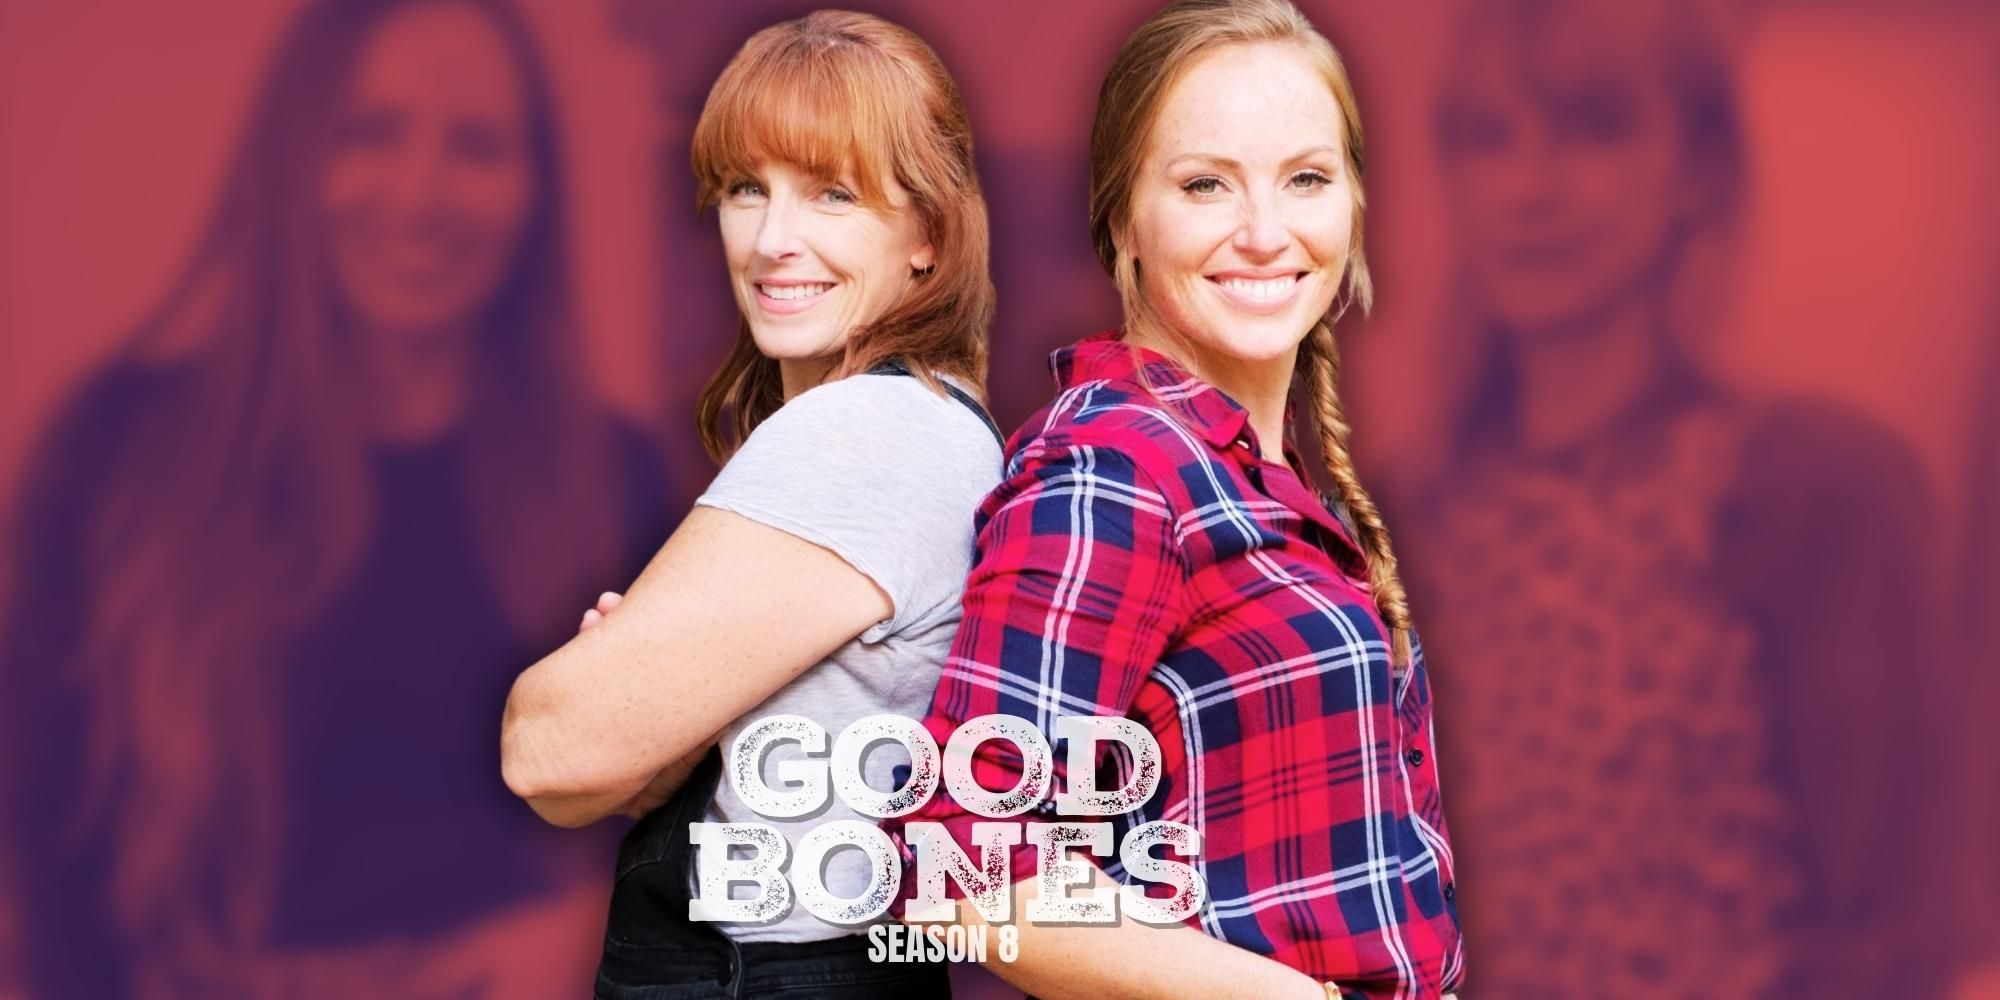 Good Bones Season 8 Release Date, Cast, & Everything We Know